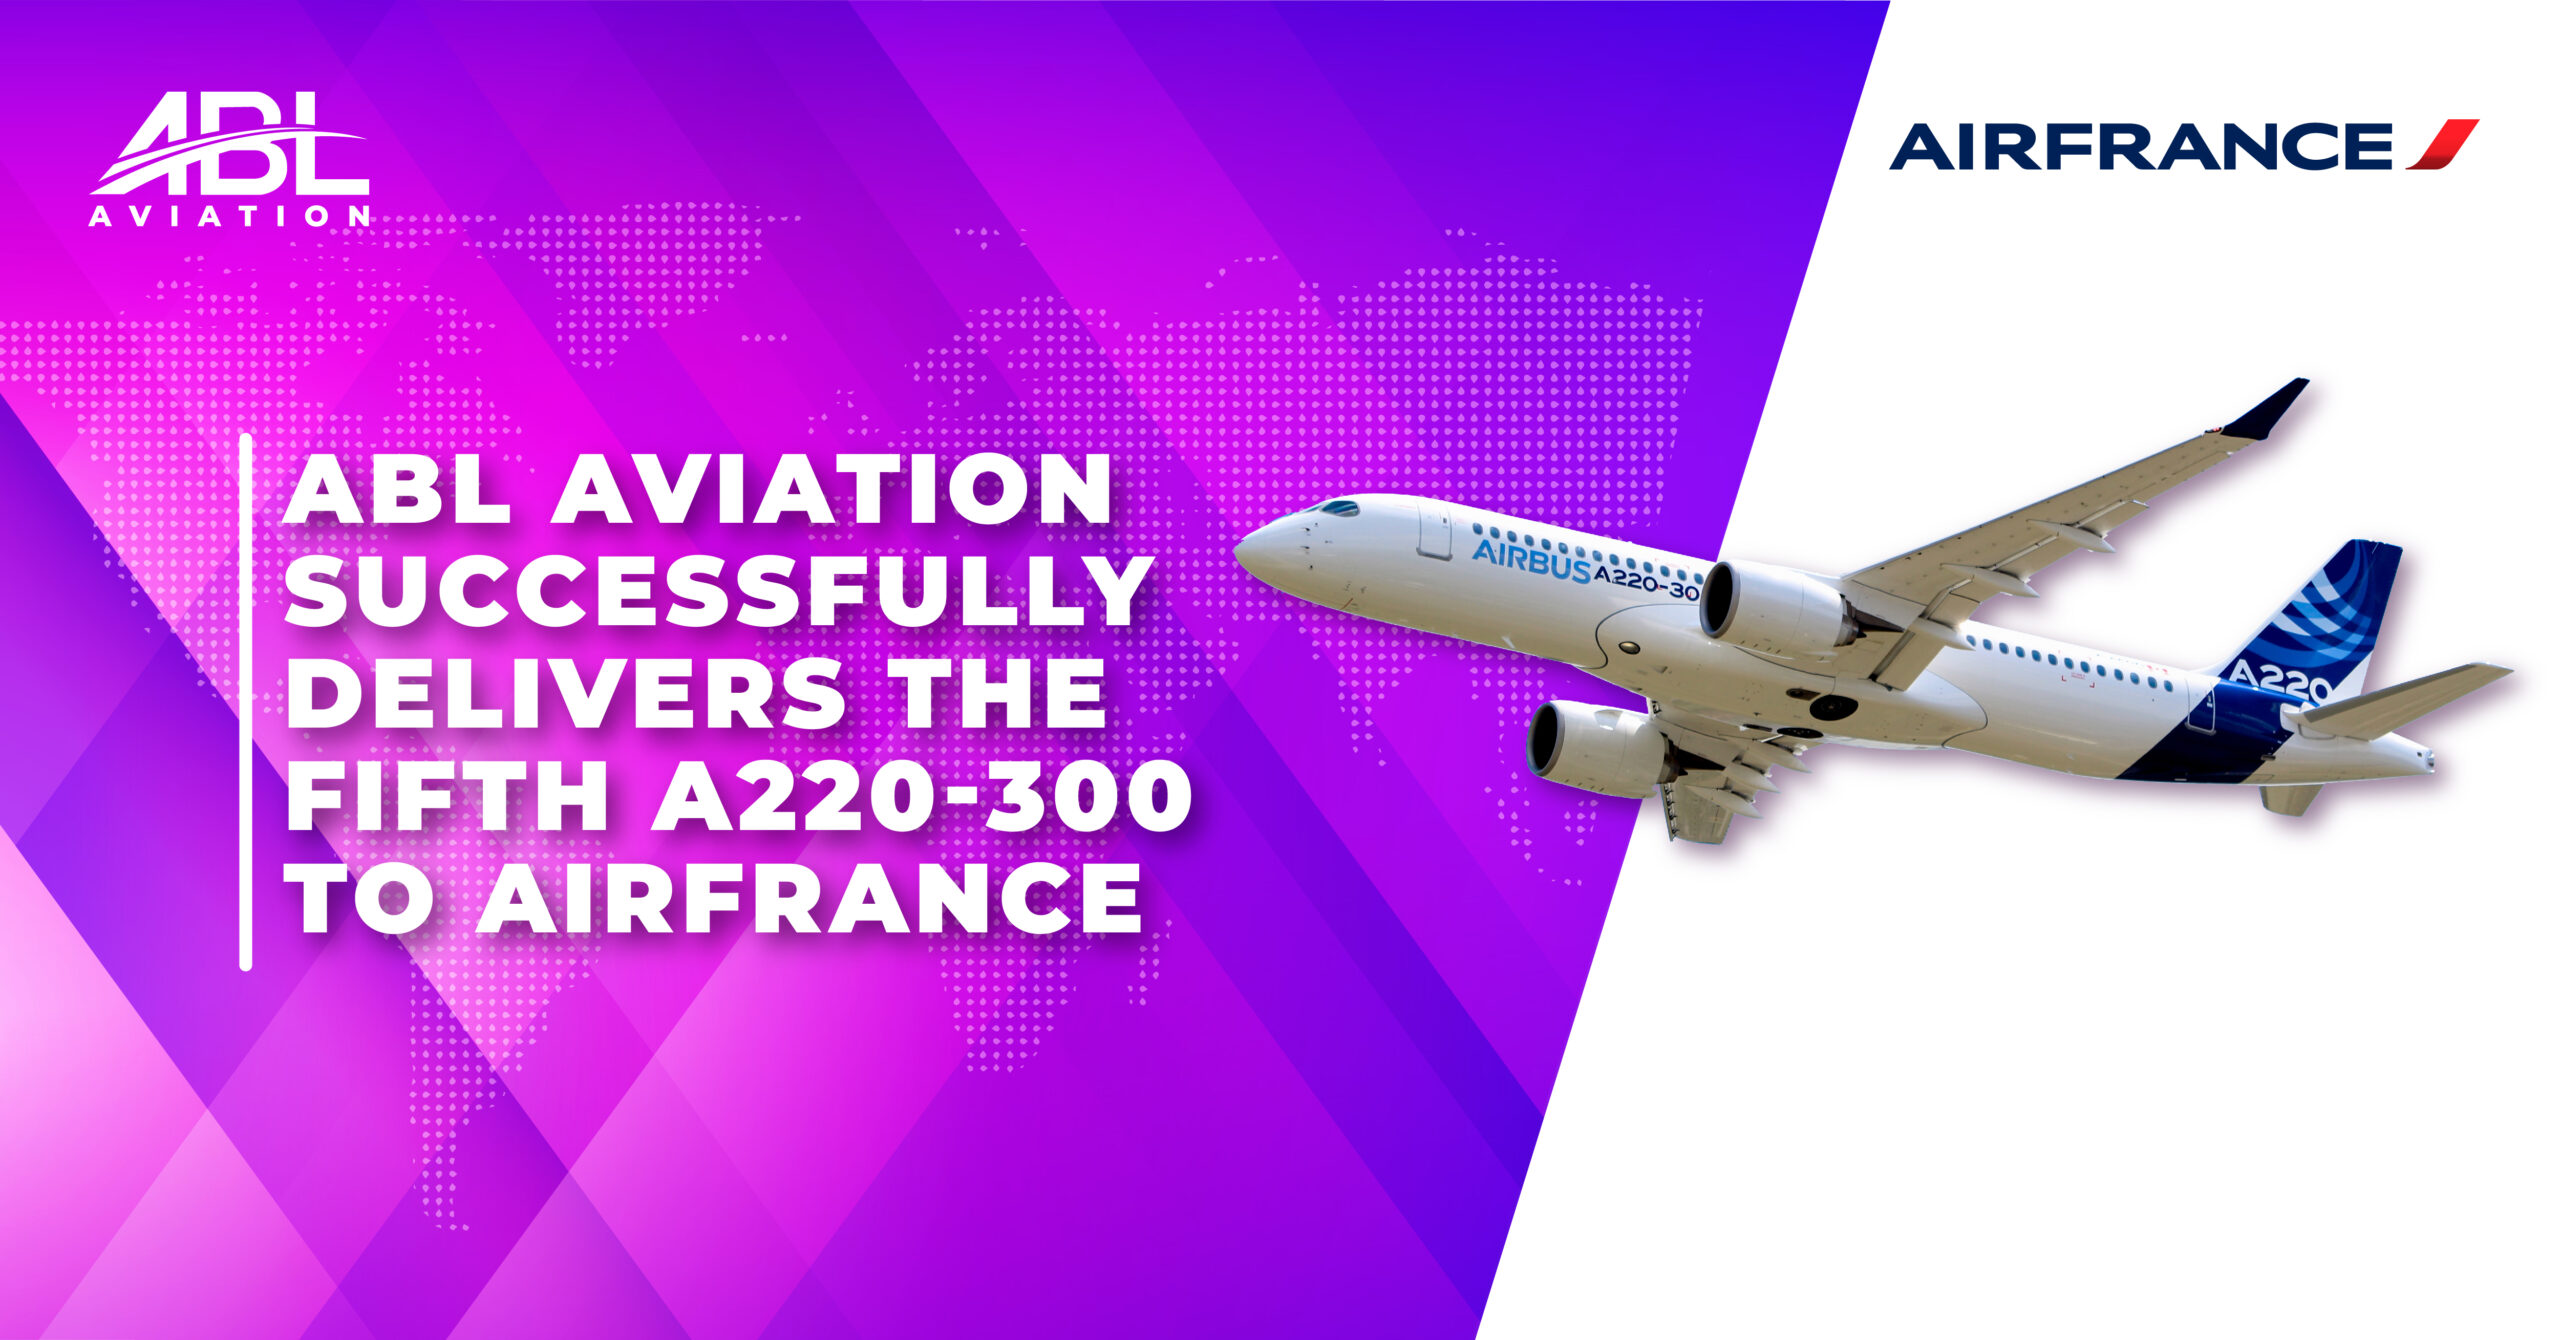 ABL Aviation Announces Fifth A220-300 Sale-And-Leaseback To Air France, With Six More Aircraft Deliveries Planned